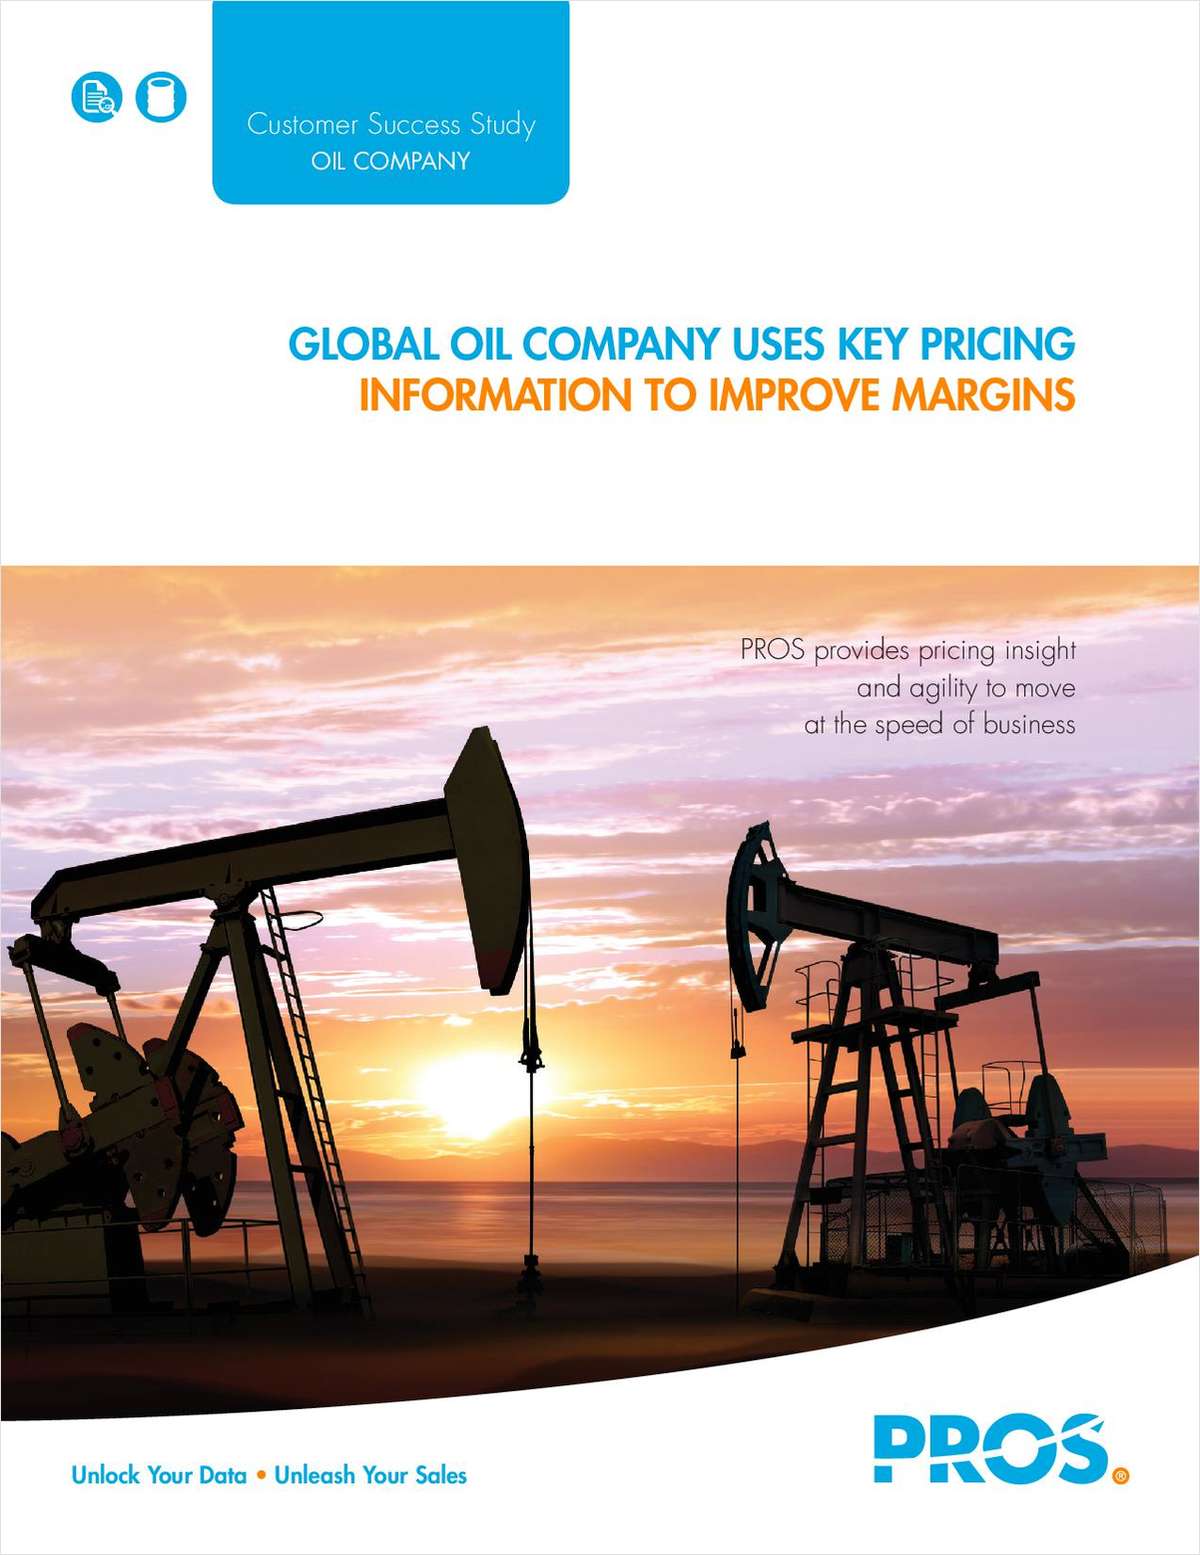 Global Oil Company Uses Key Pricing Information to Improve Margins